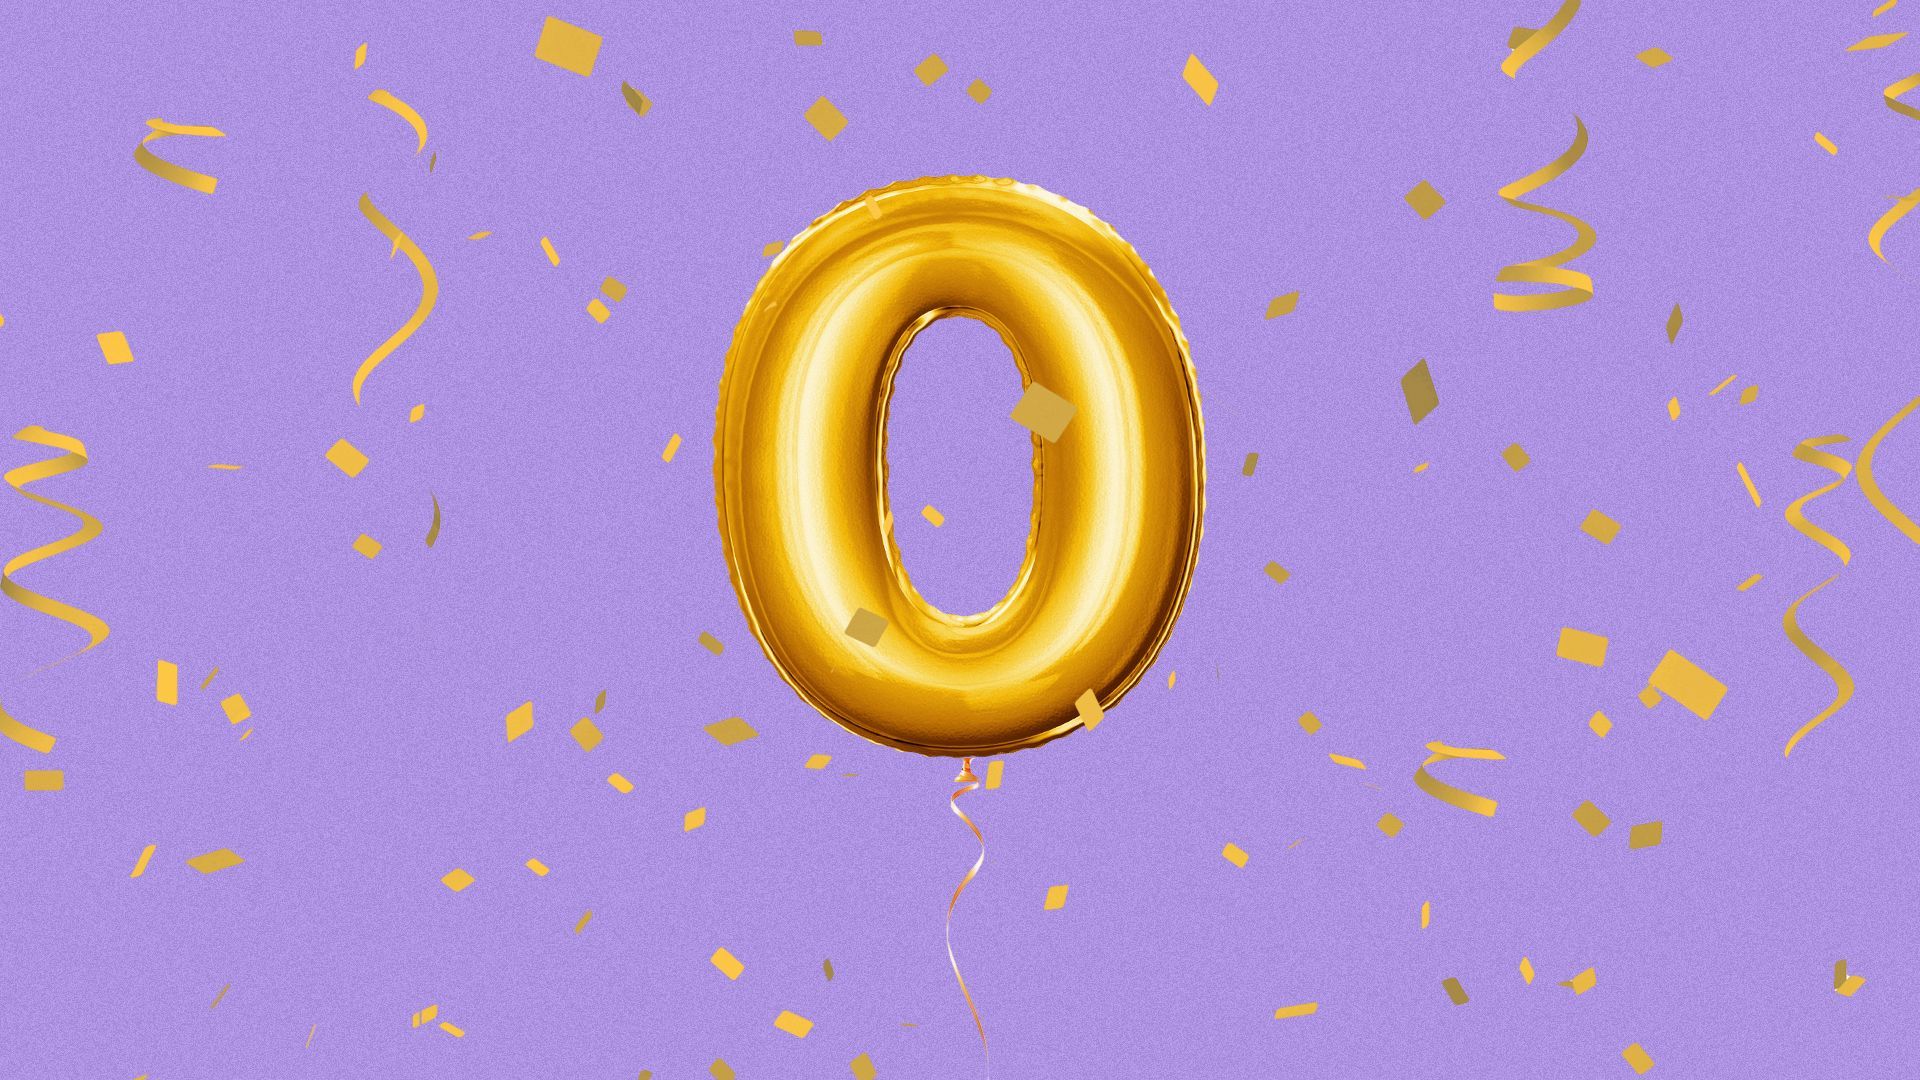 Illustration of a balloon in the shape of a zero with confetti all around.